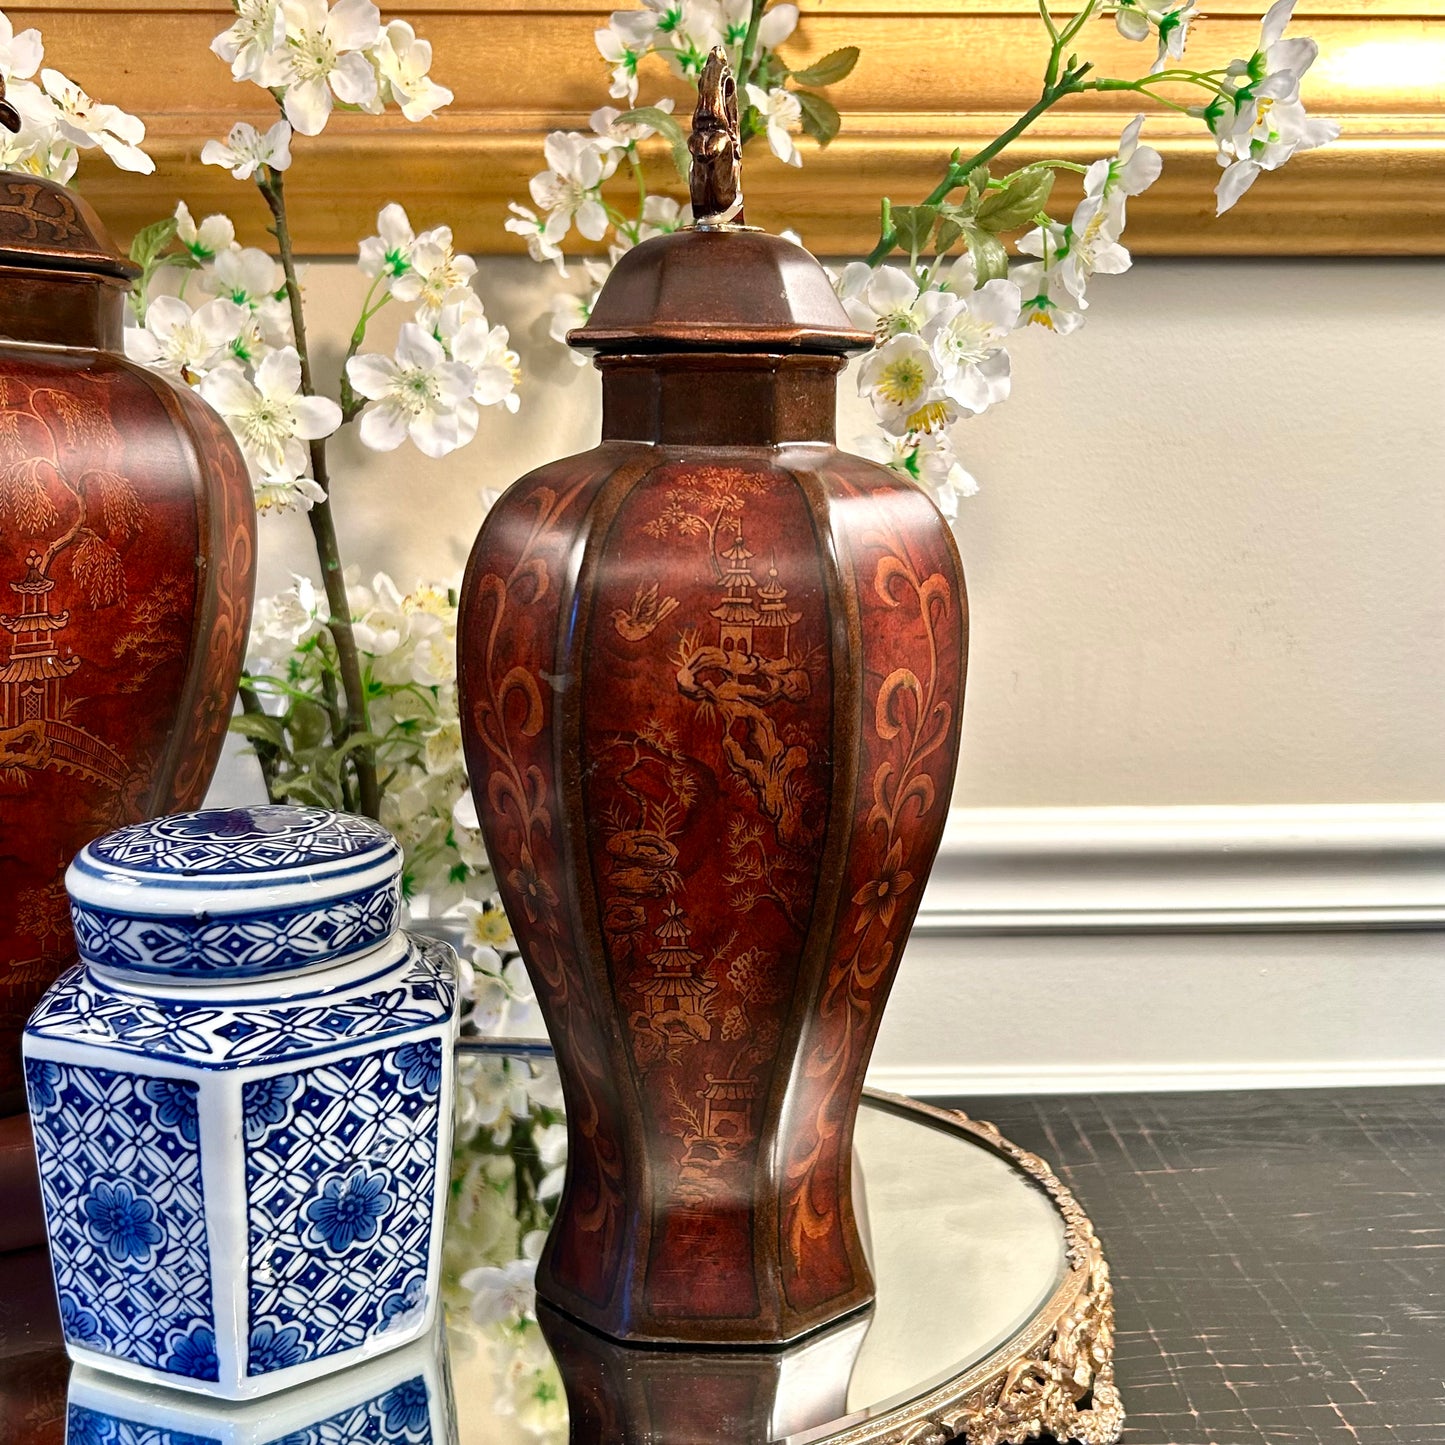 Set of two chinoiserie pagoda statuesque pagoda vases jars plus lids.